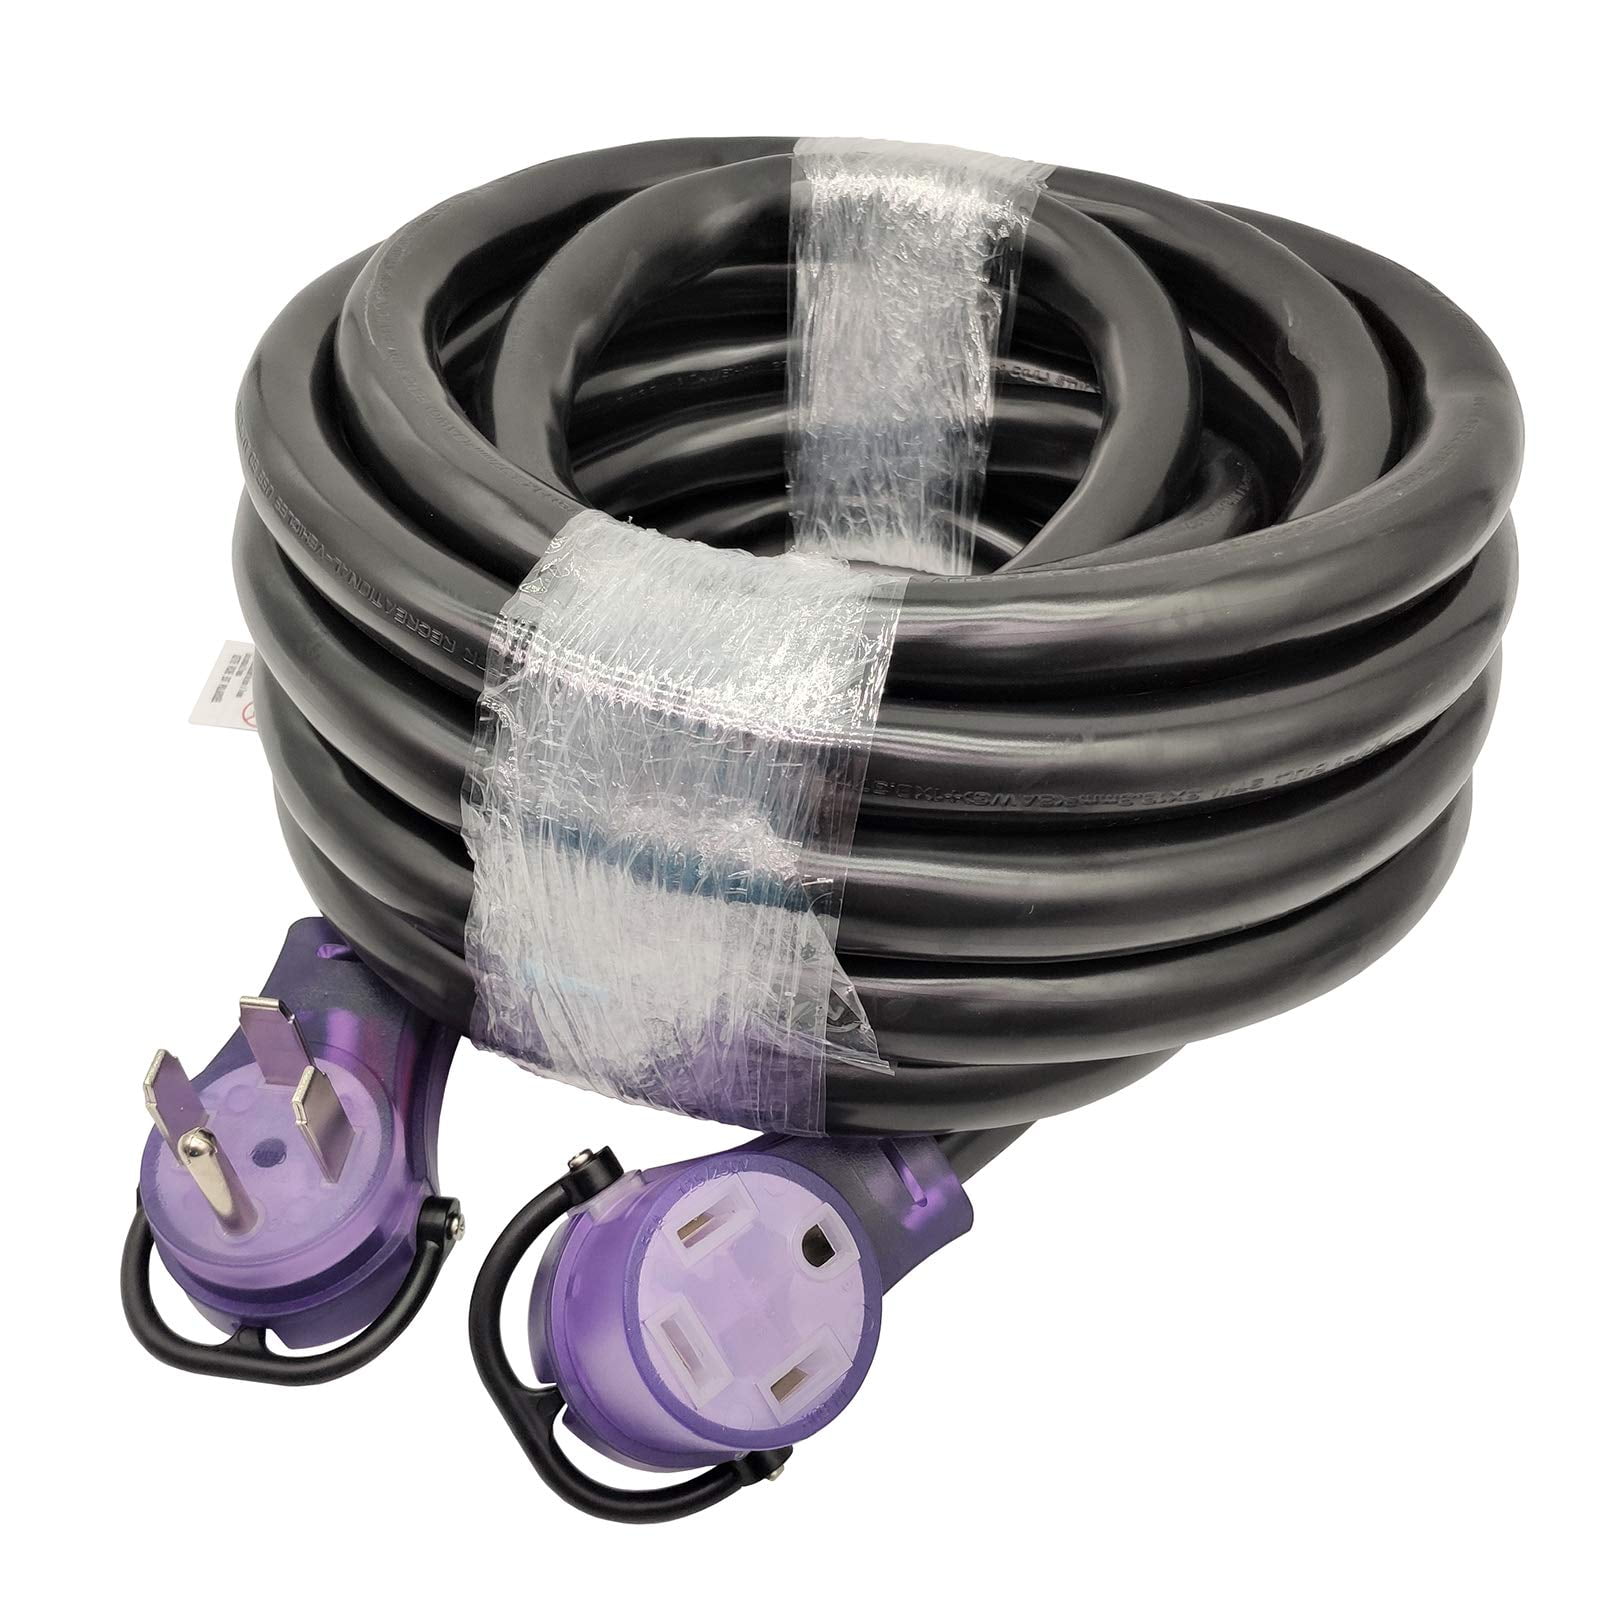 60-Foot Long Range Extension Cord 14-50P Male Plug To 14-50R Female Receptacle Made In American FX1537-60FT Heavy Duty 10/4 10AWG 10-Gauge Real Copper Wire NEMA 